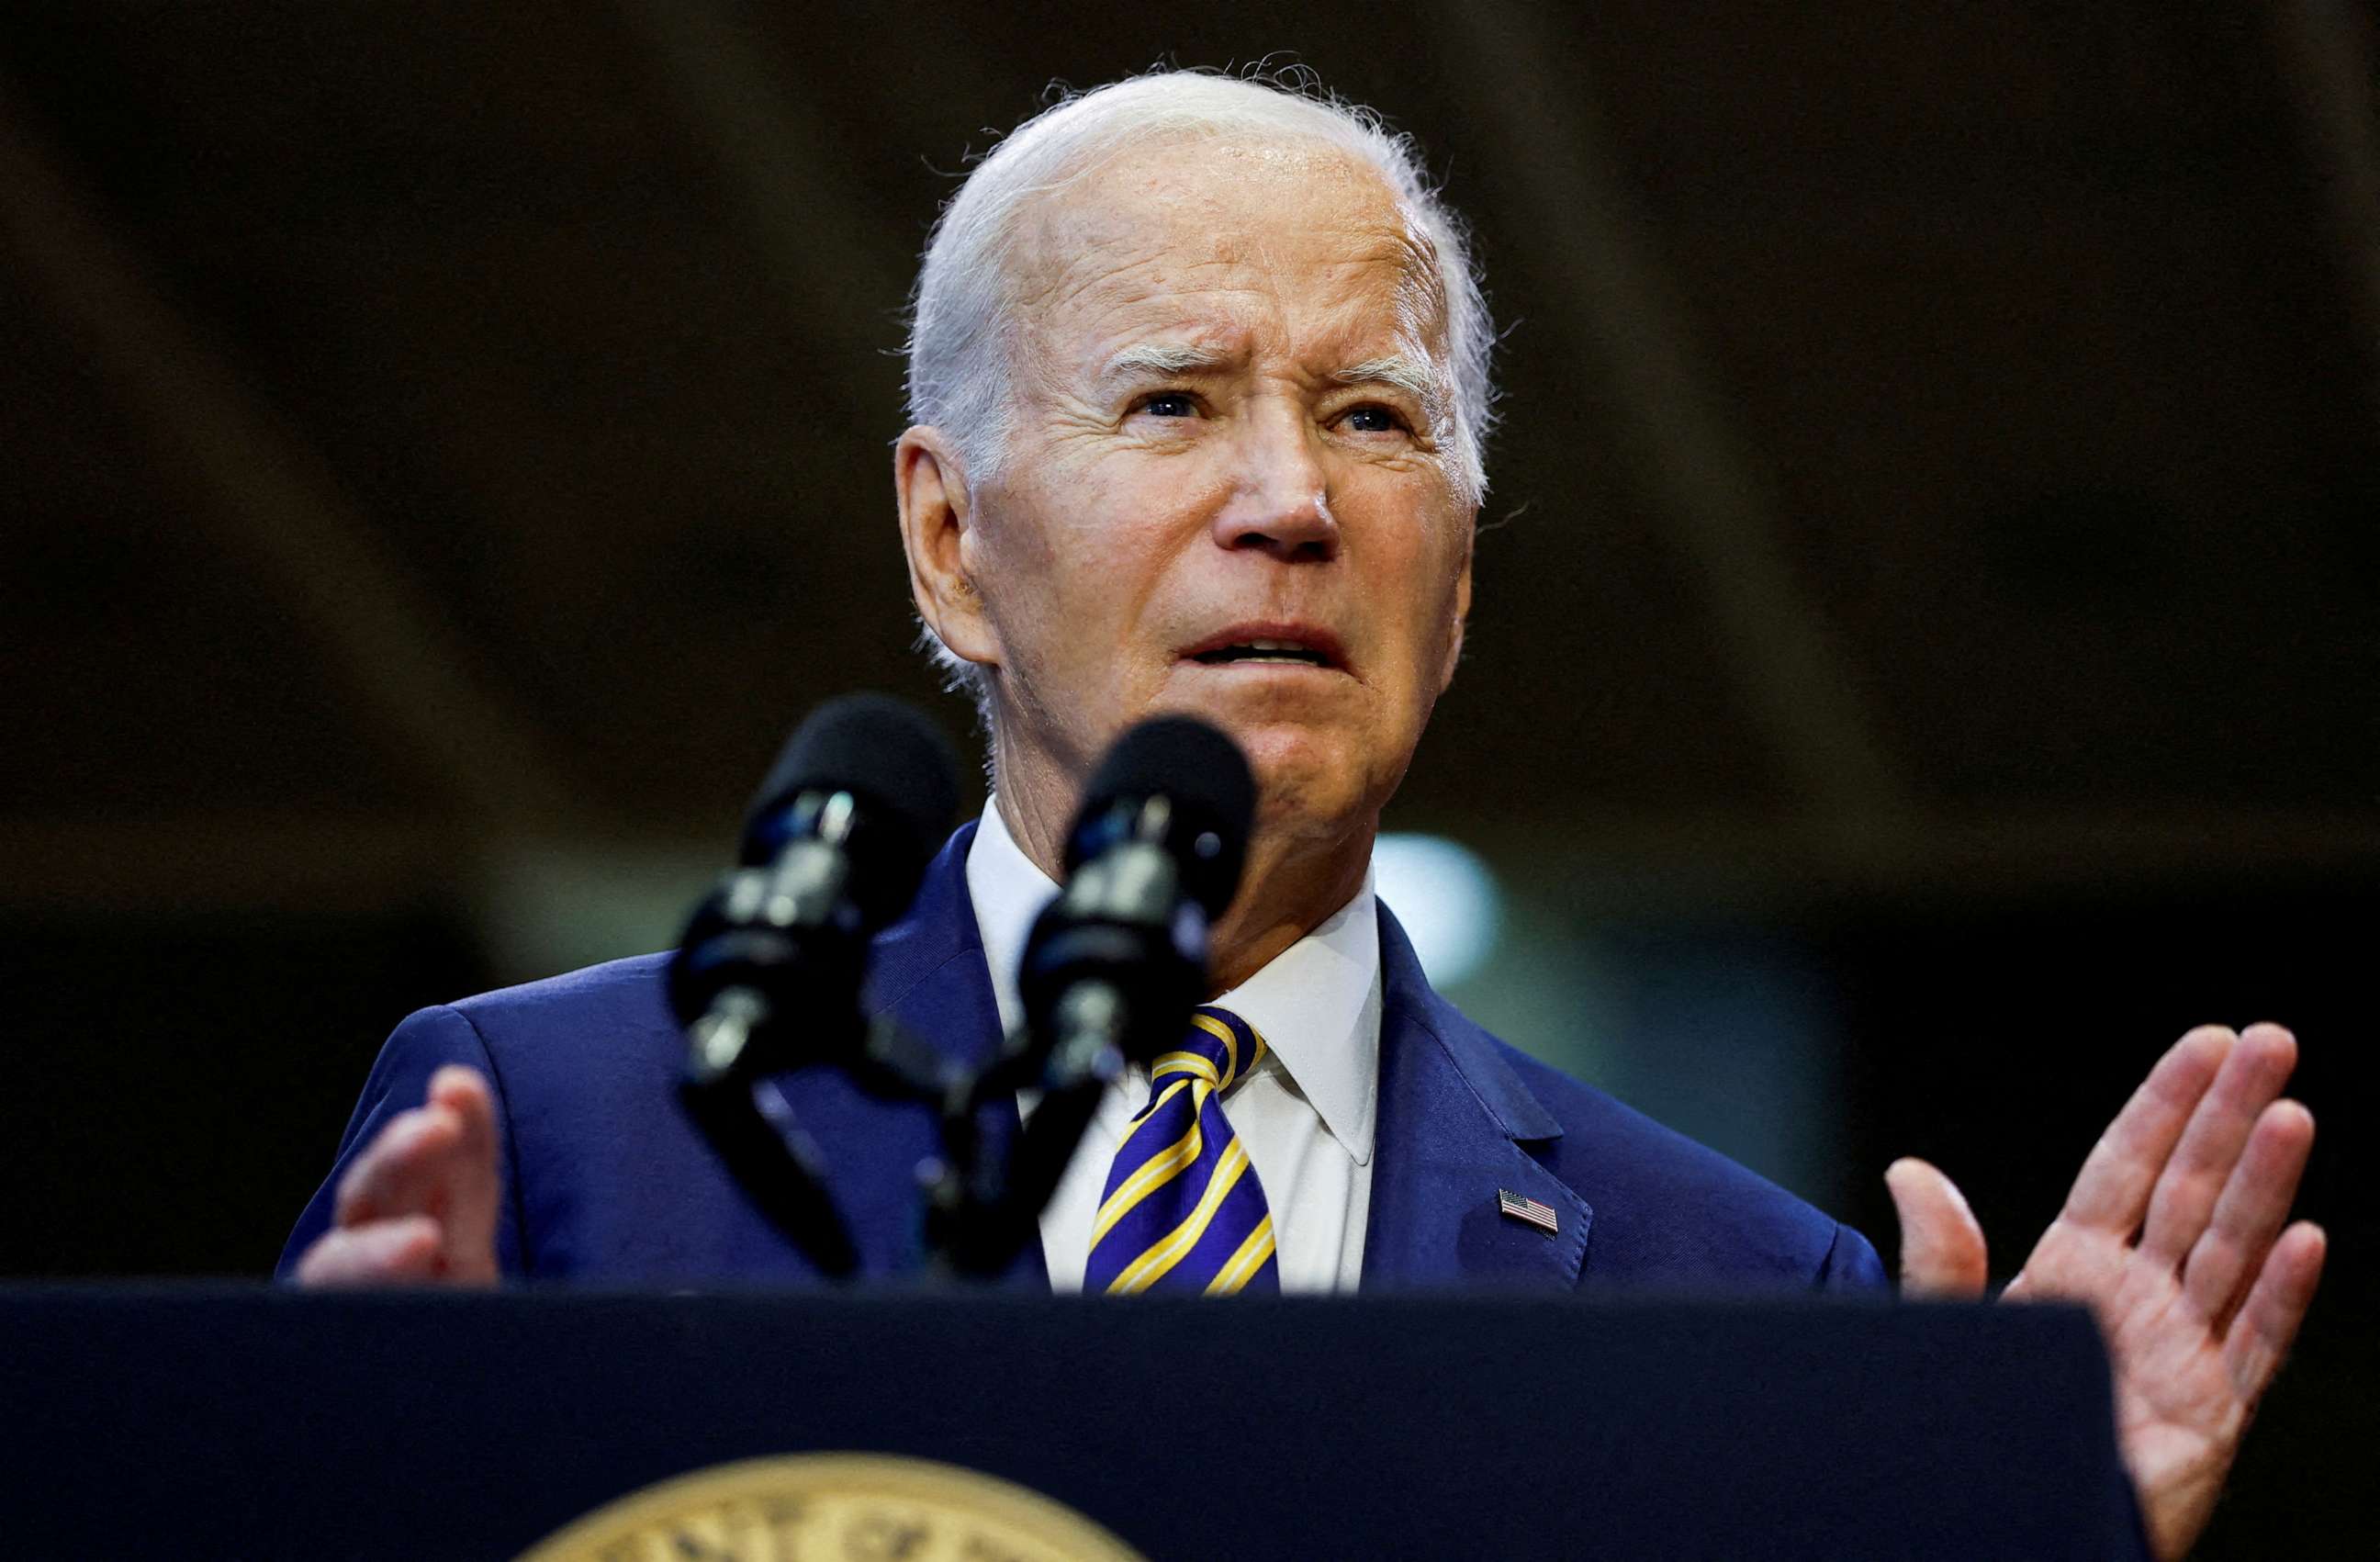 FILE PHOTO: U.S. President Joe Biden delivers remarks on his economic agenda at Prince George's Community College in Largo, Maryland, on Sept. 14, 2023.